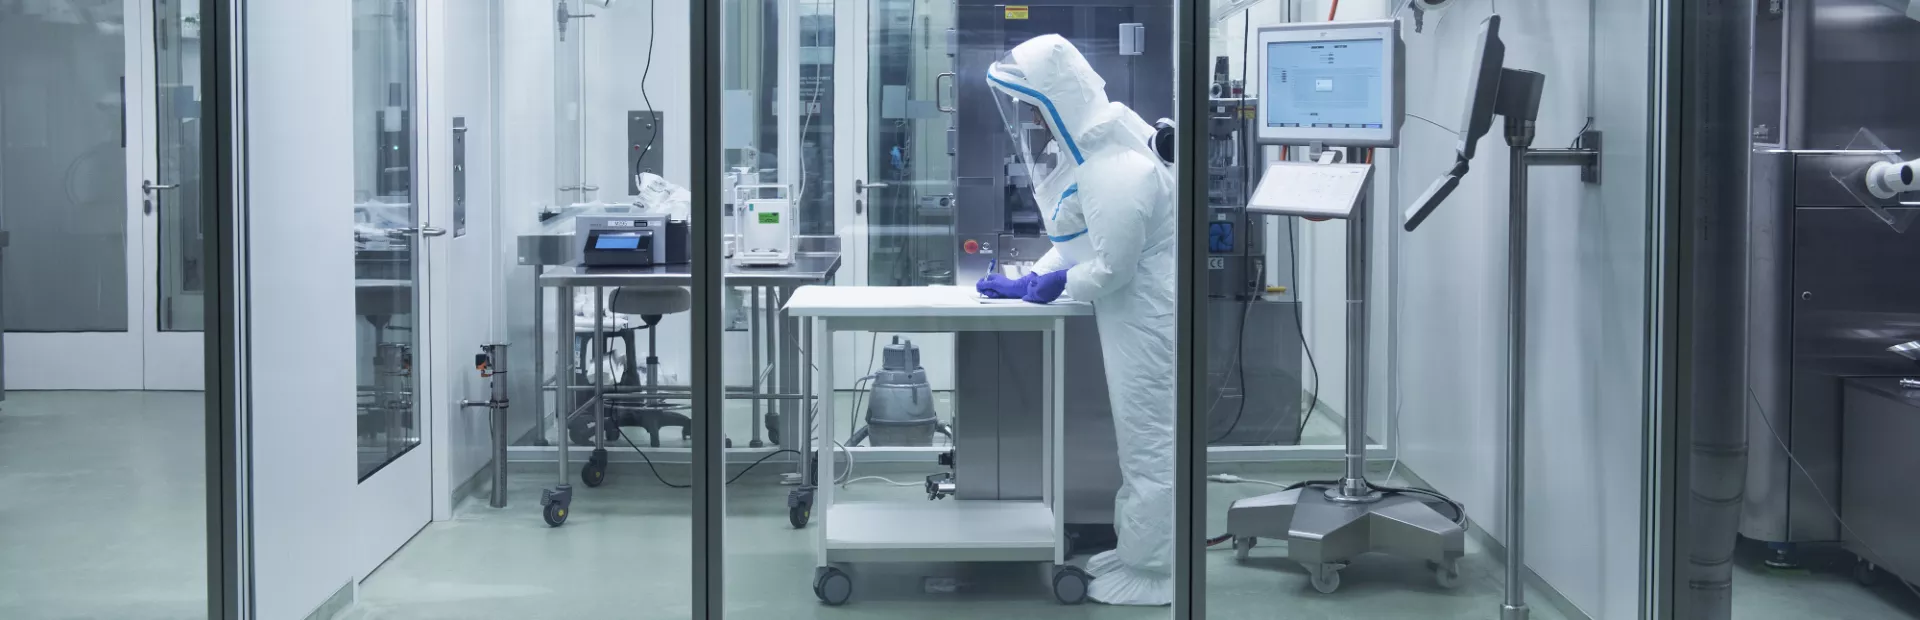 Scientist working with protective suit